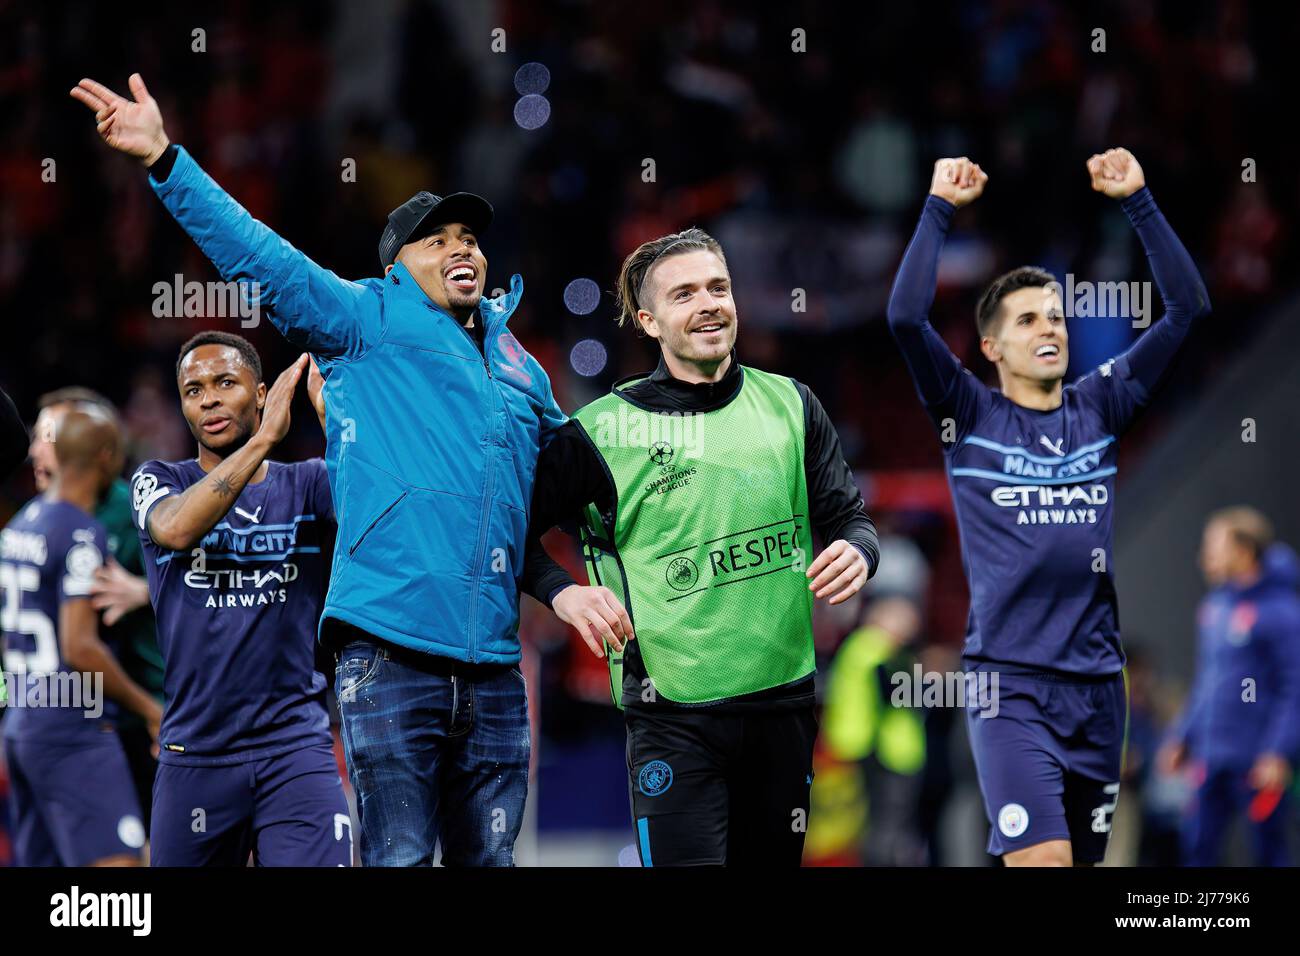 MADRID - APR 13: Grealish celebrates the victory after the Champions League match between Club Atletico de Madrid and Manchester City at the Metropoli Stock Photo